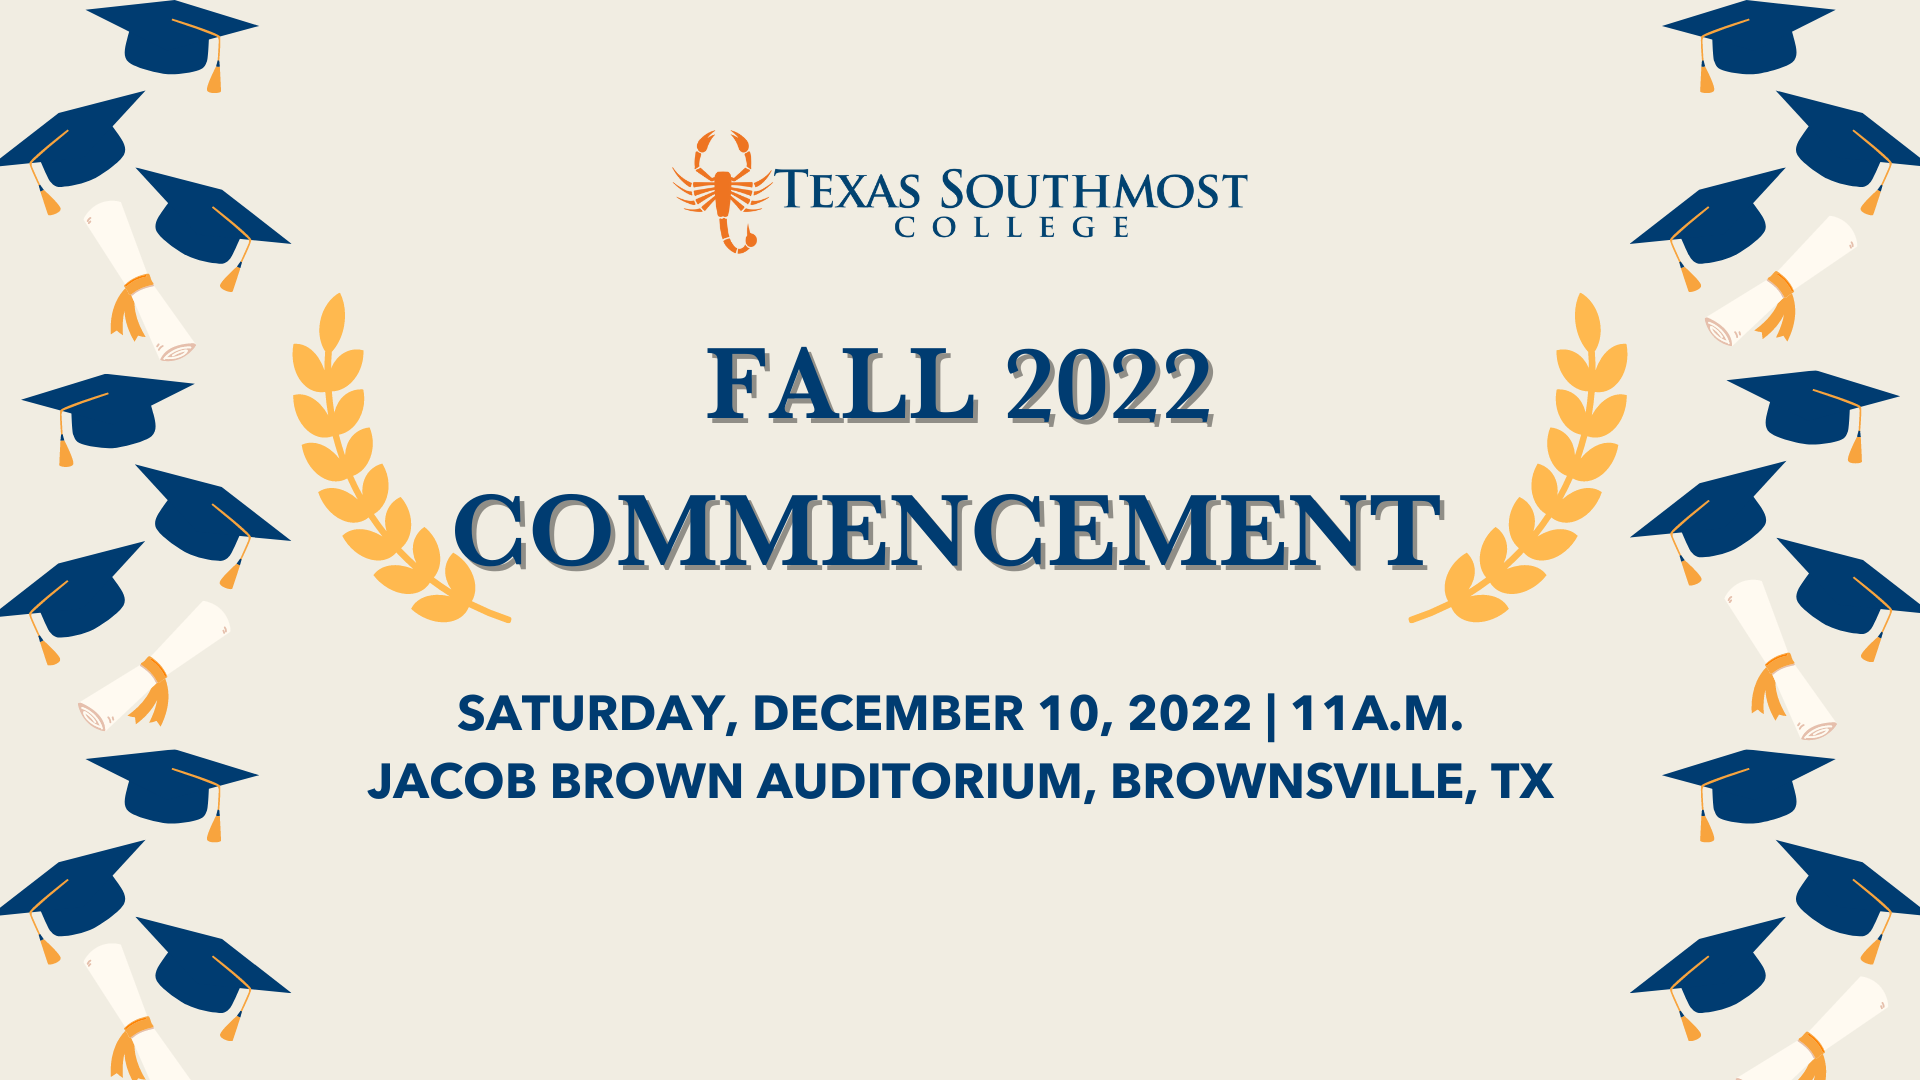 FALL 2022 COMMENCEMENT